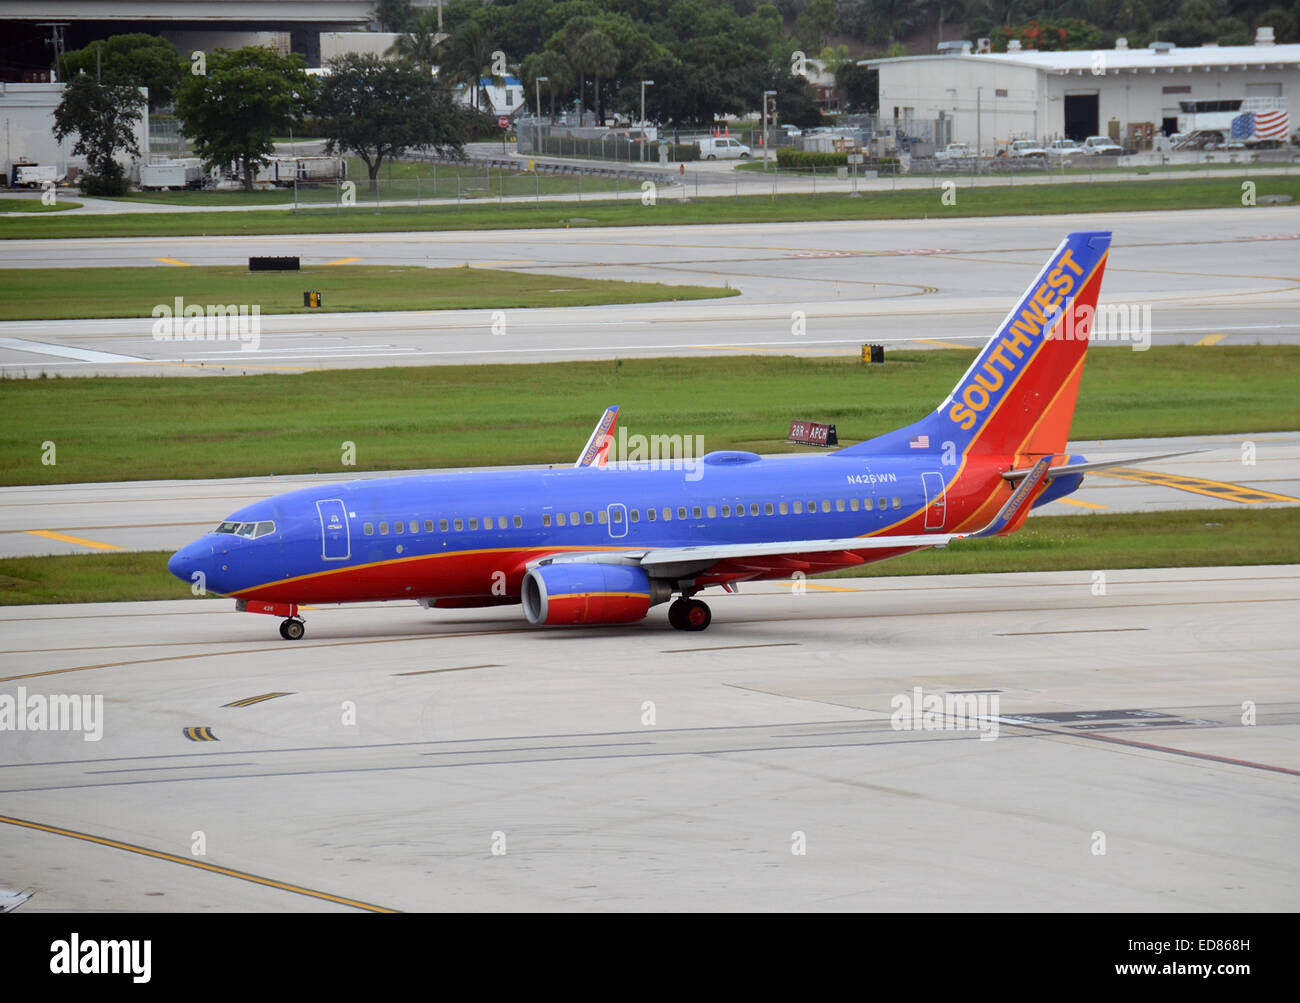 Fort Lauderdale, USA - July 21, 2013: Southwest Airlines Boeing 737 passenger jet departs from Fort Lauderdale, Florida on July Stock Photo